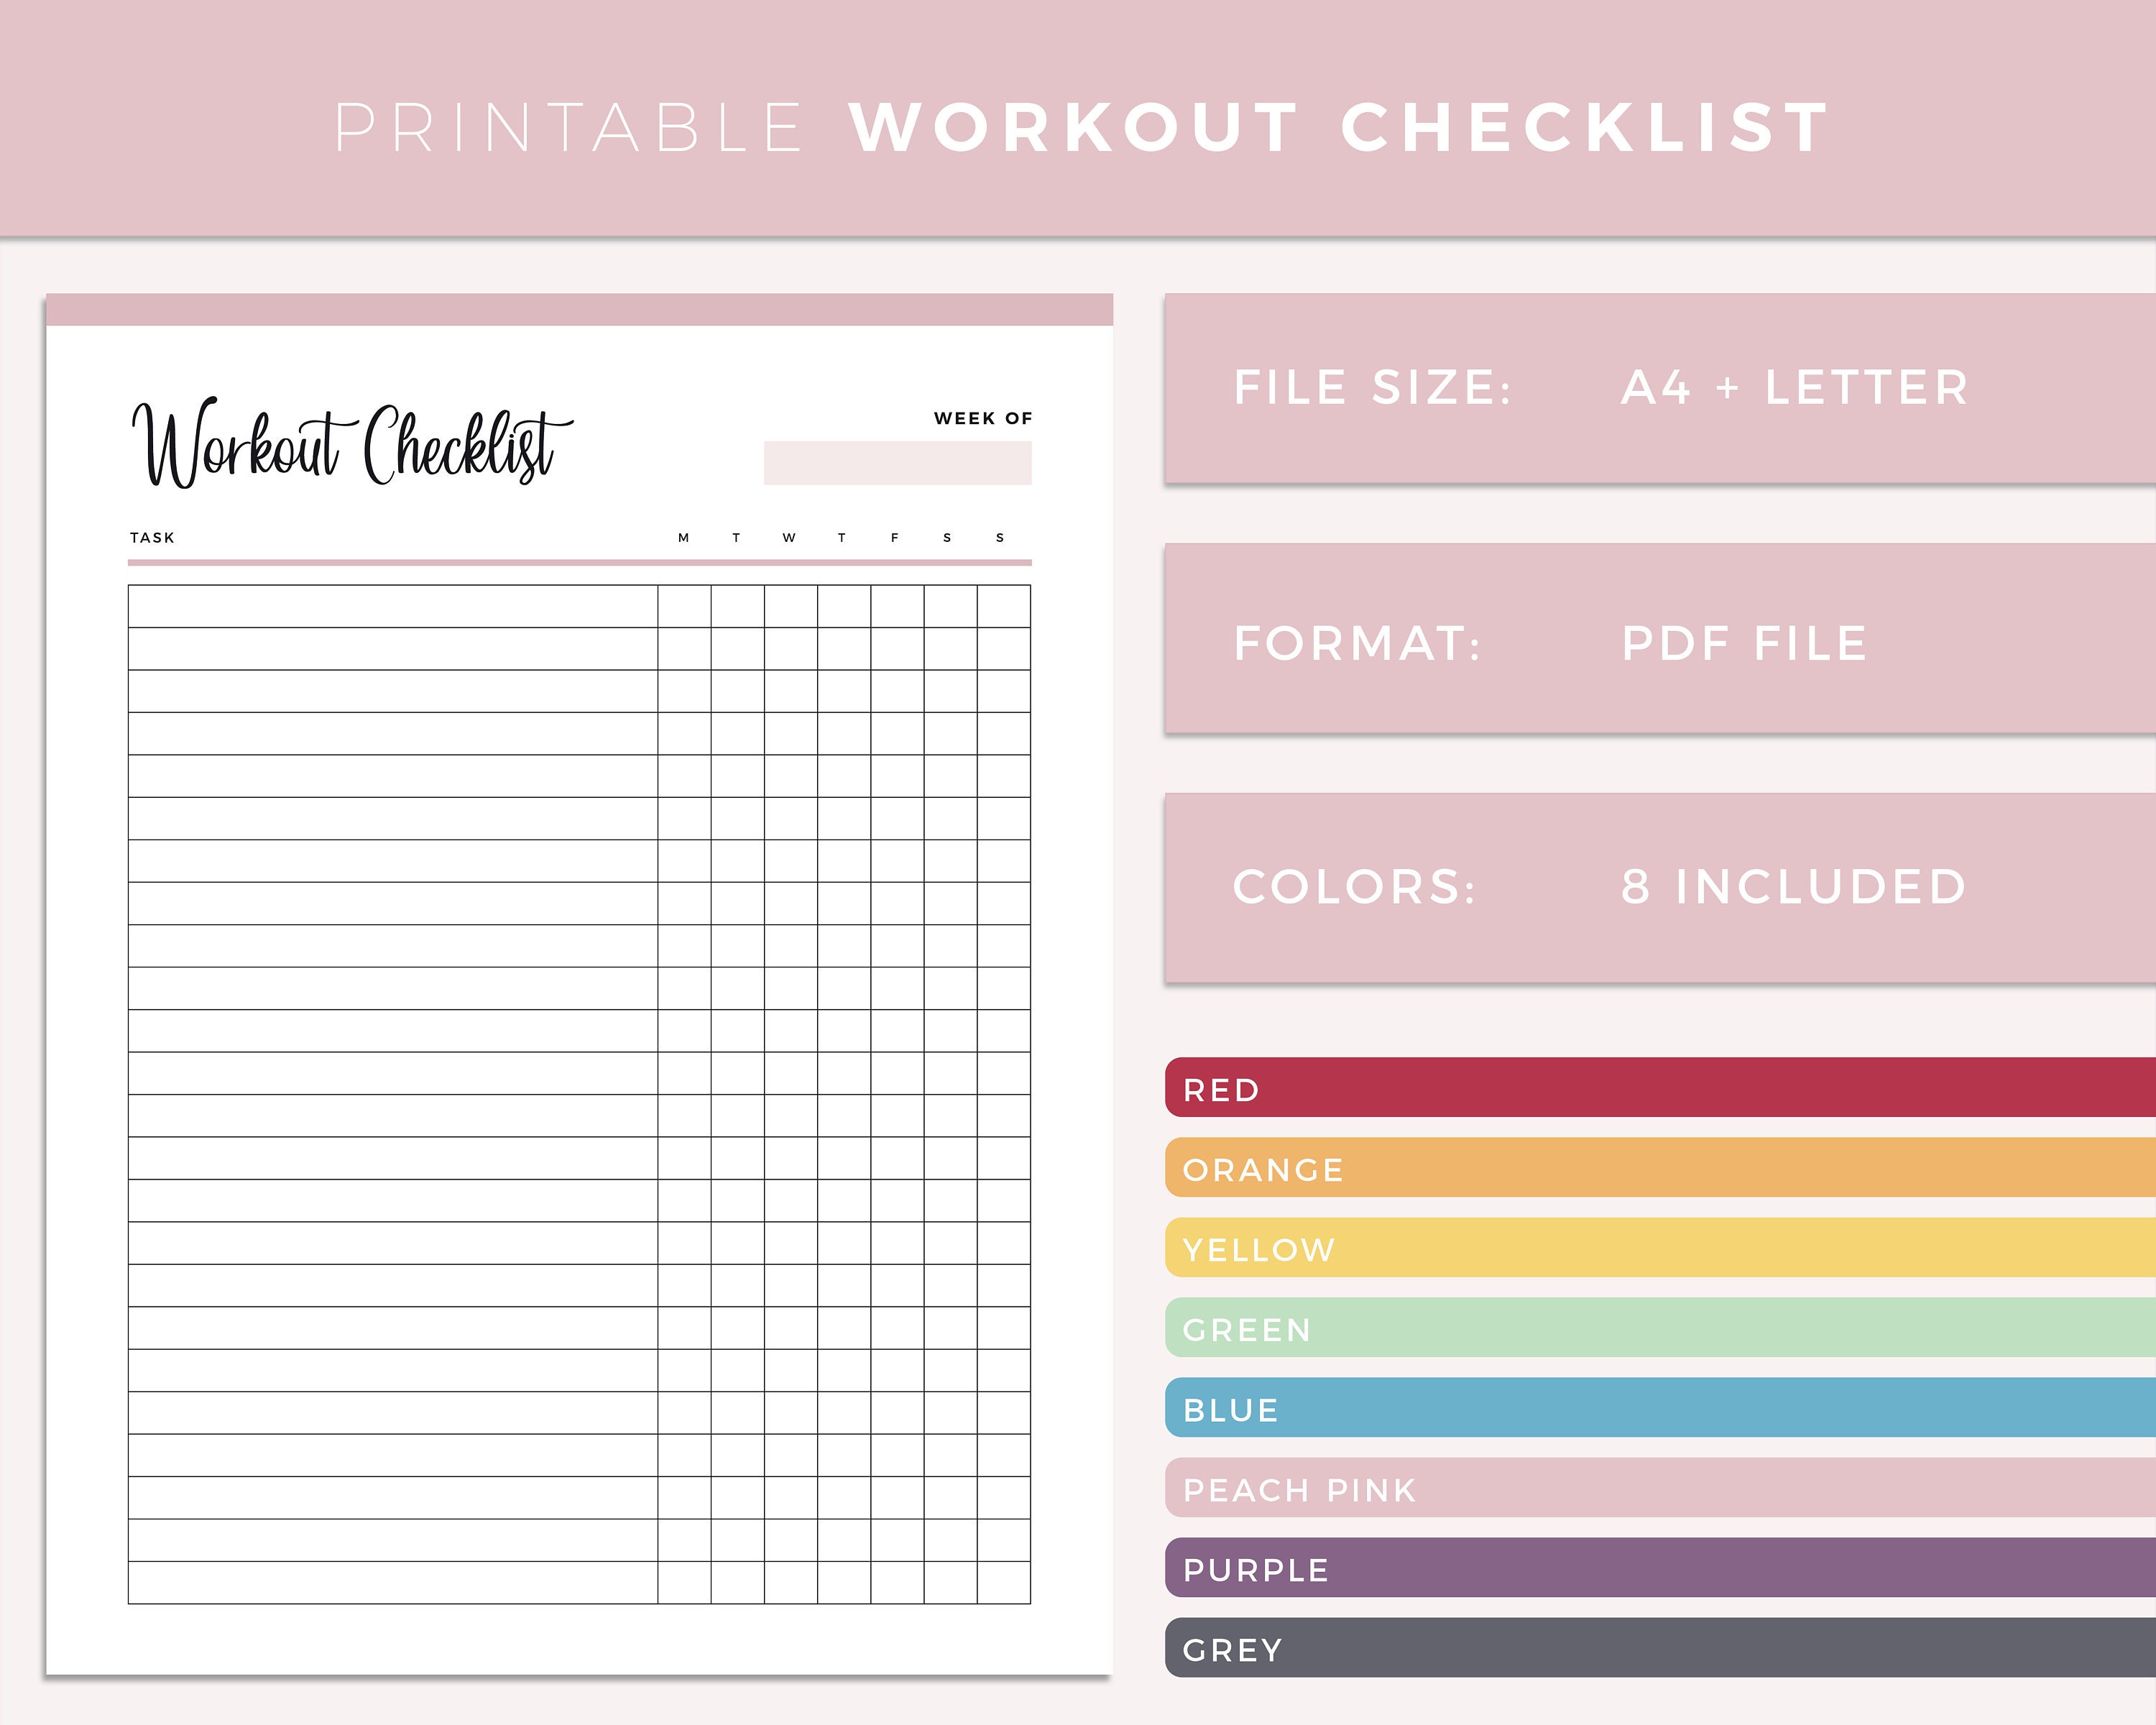 Printable Workout Checklist Print At Home Daily Exercise Etsy